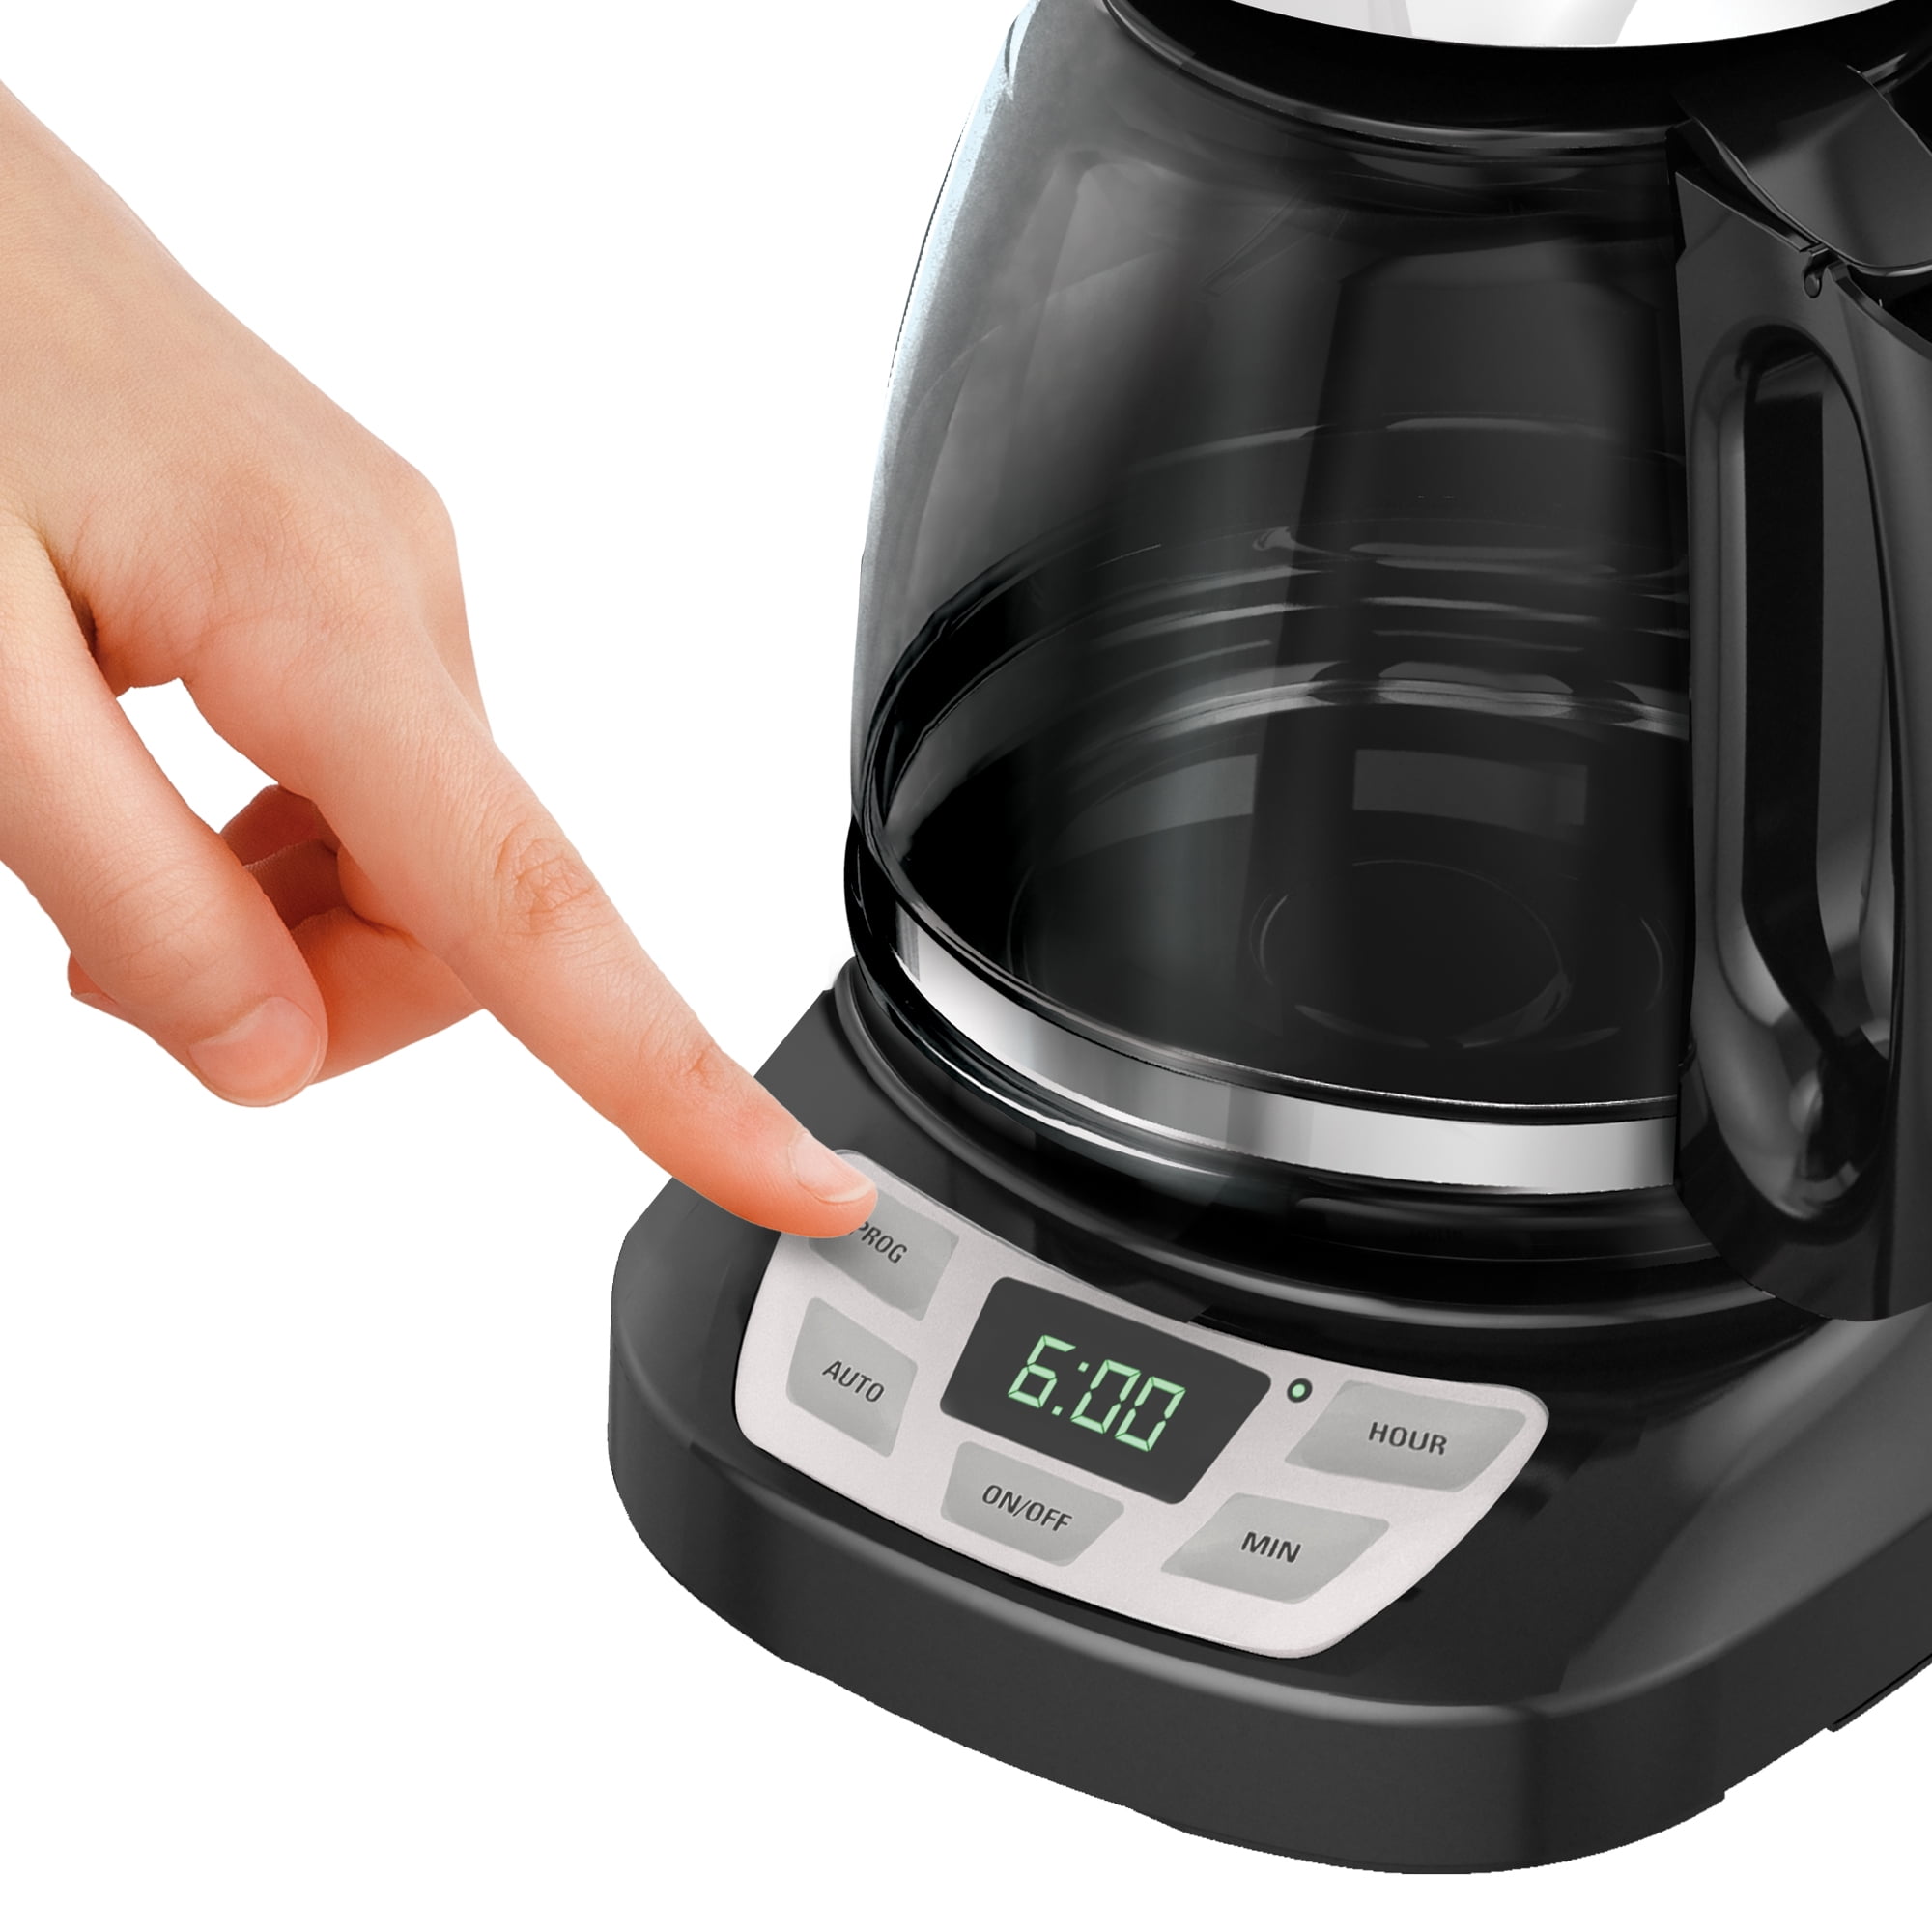 How to Use a Black & Decker Coffemaker - Programmable Timer 